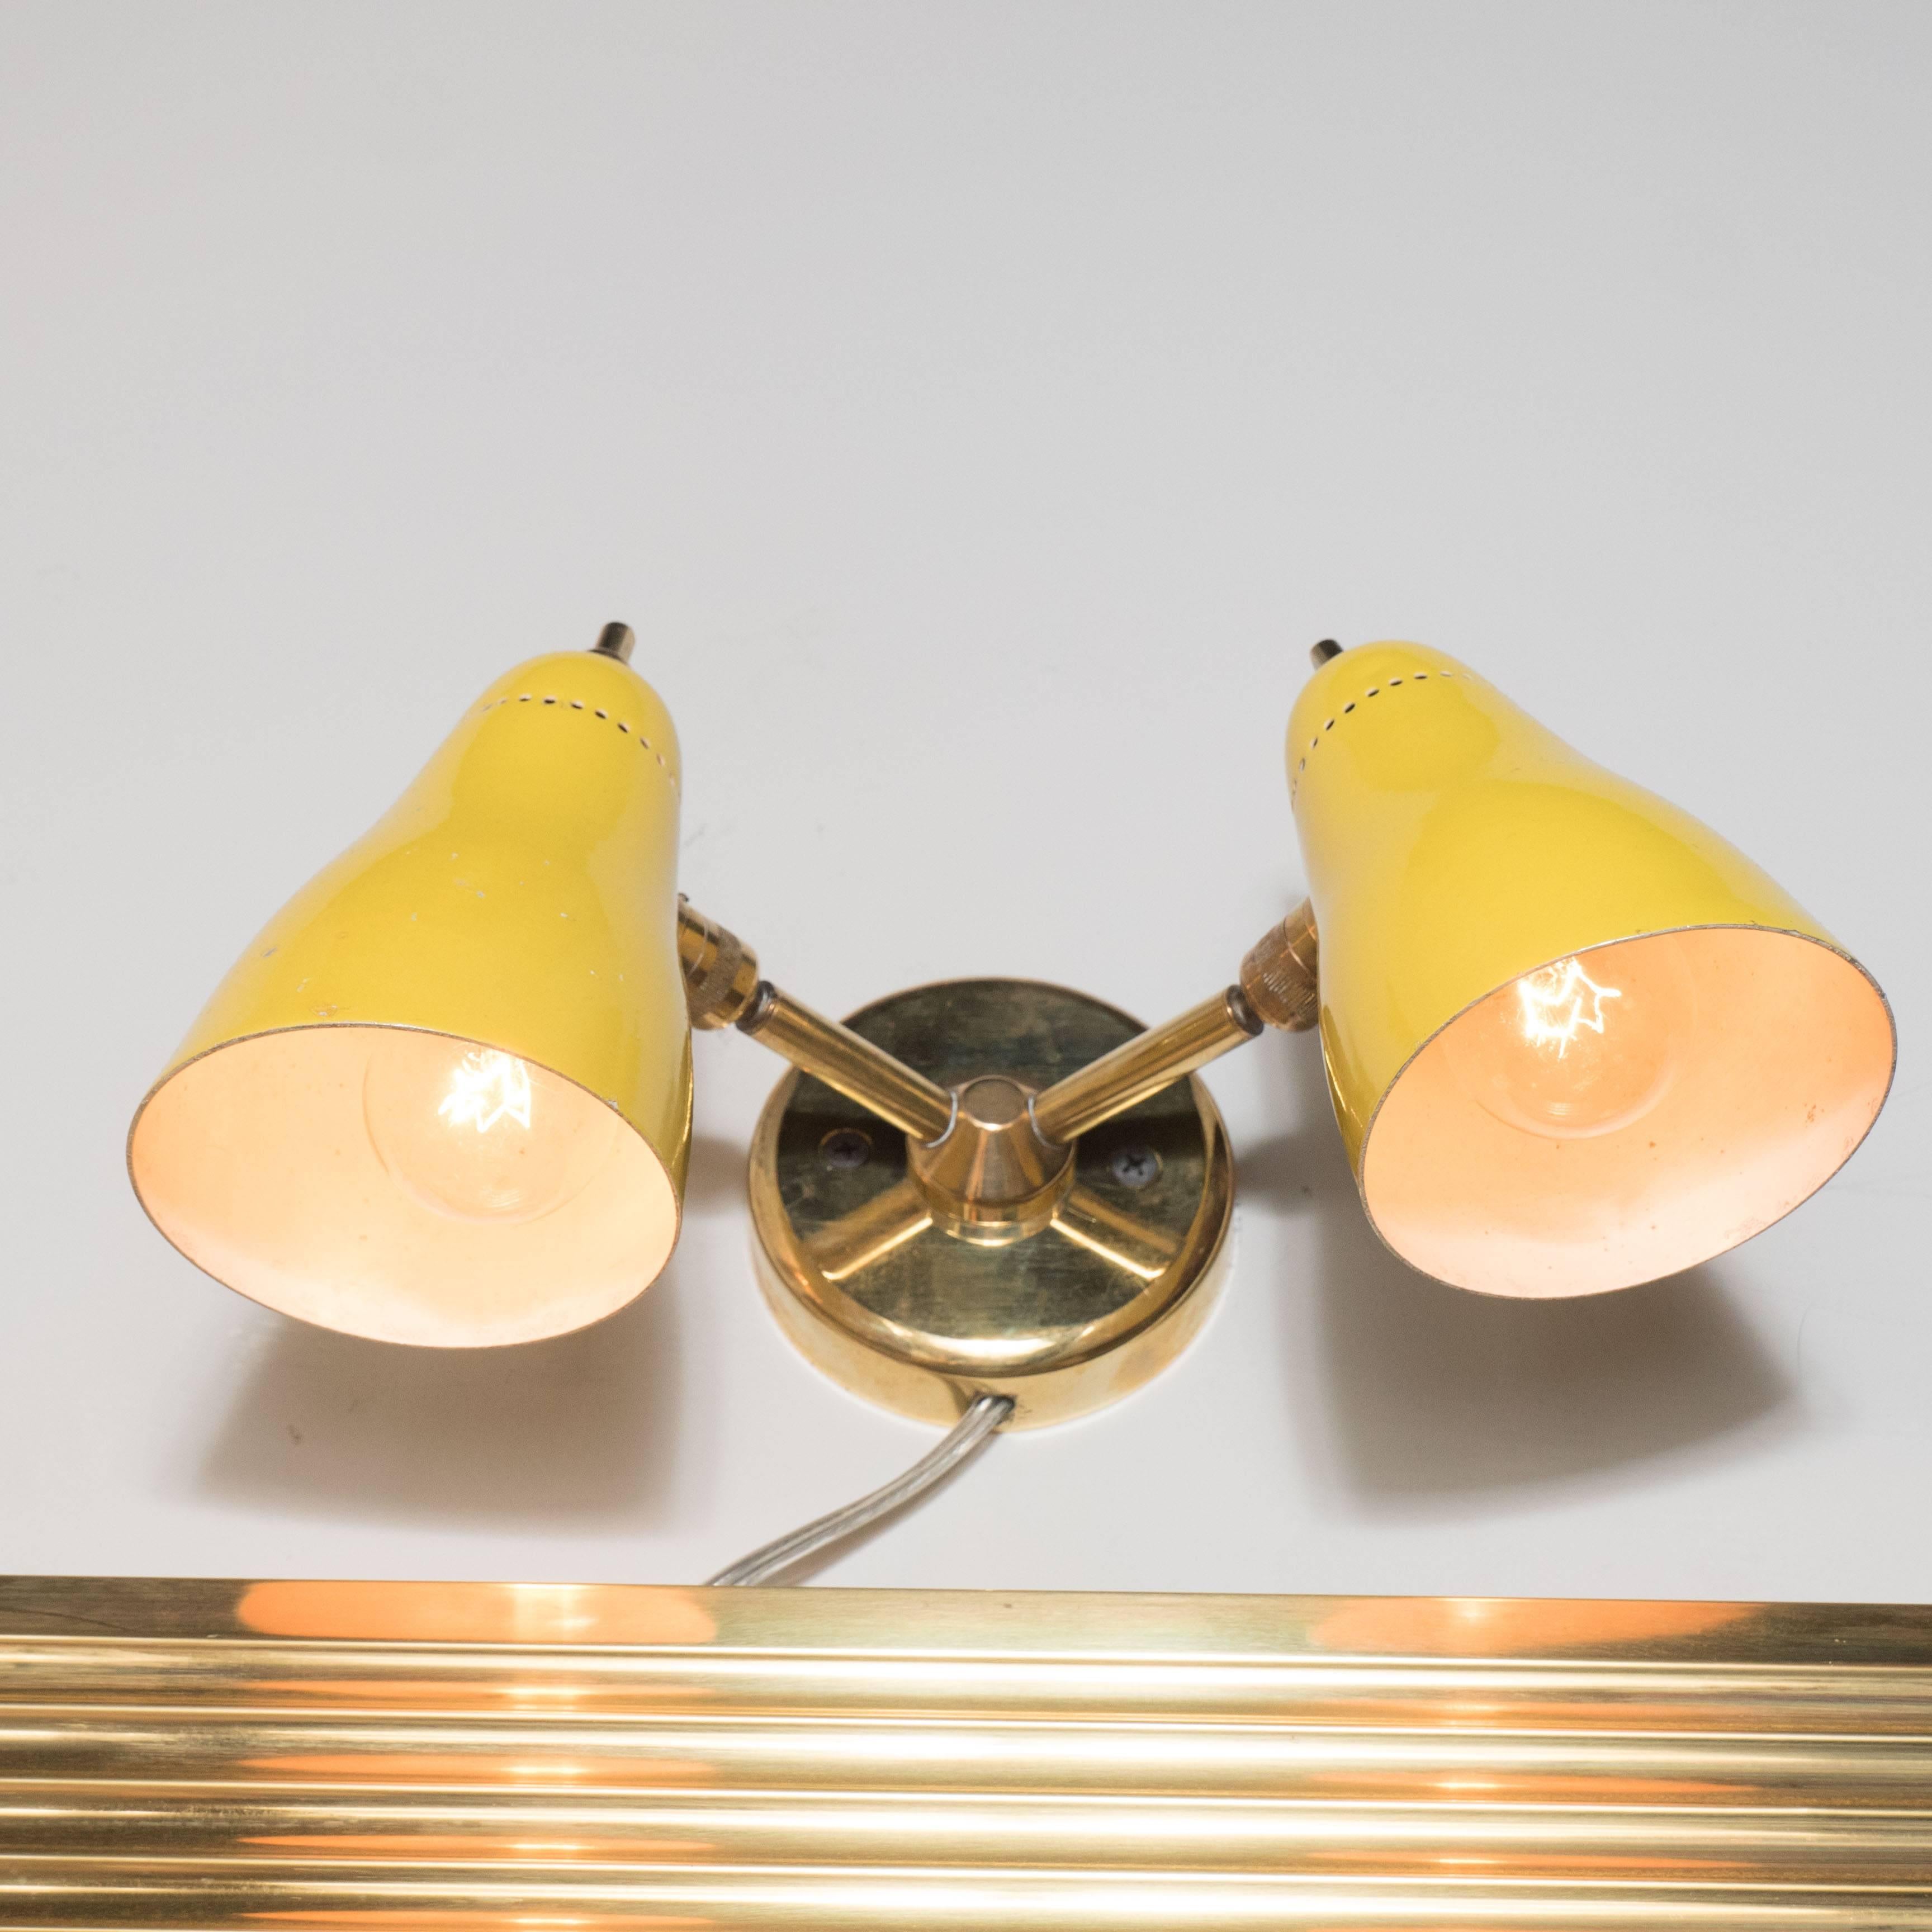 Stylish Mid-Century yellow enamel and brass sconce, Italy, circa 1960. The two conical shades enameled in rich yellow with brass arms leading to a circular brass wall support. A great example of iconic Italian Mid-Century design. 

This item has